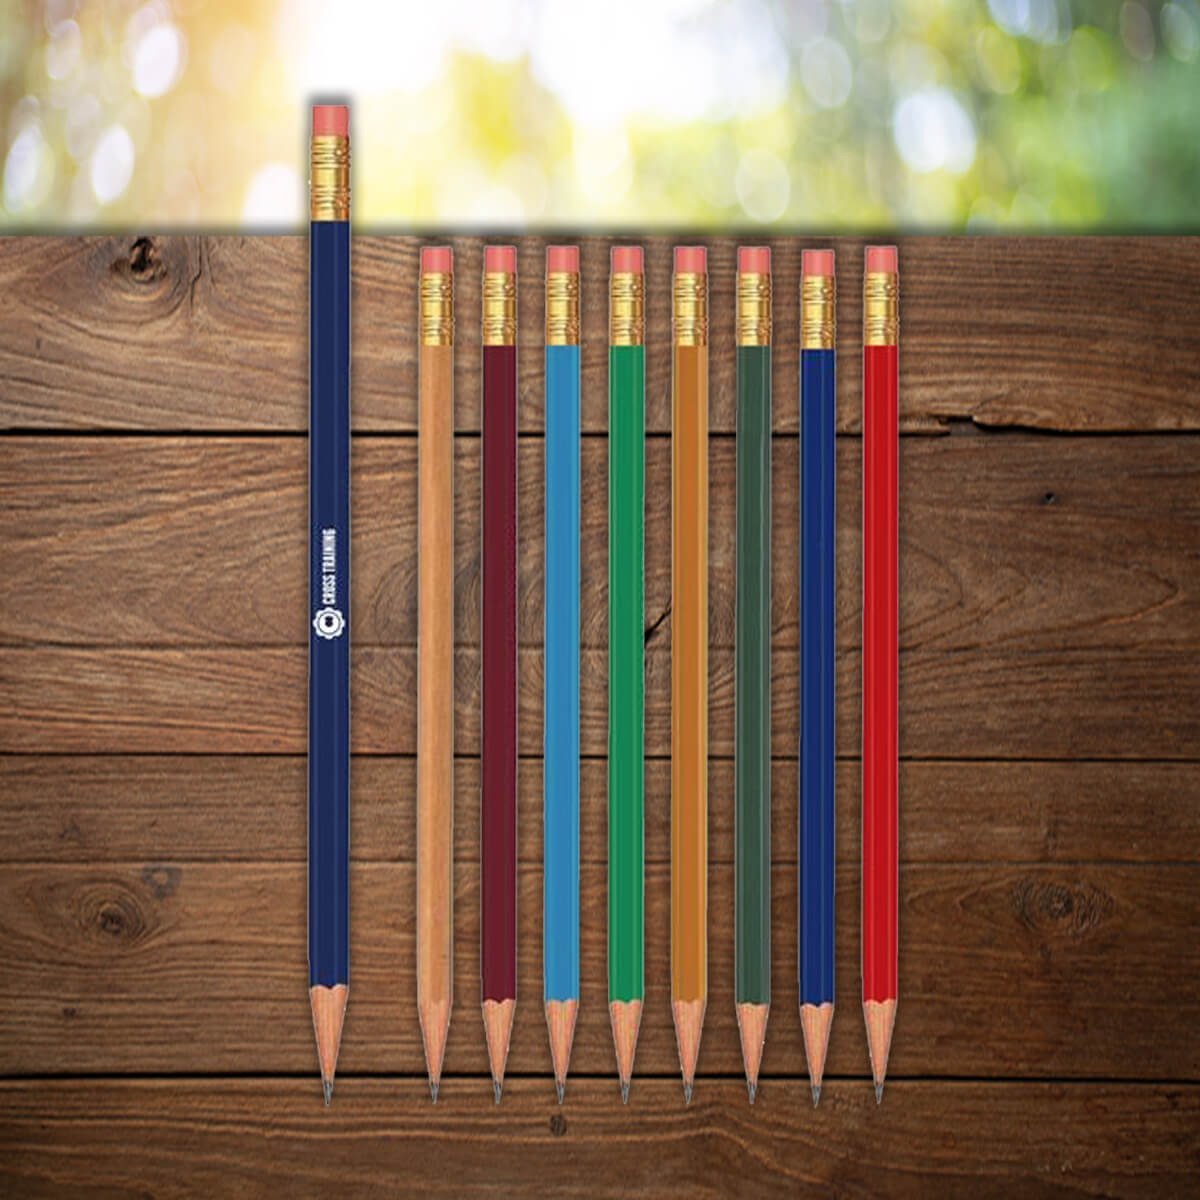 Display of color variety with imprint shown on custom pencils promotional writing implements by curative printing